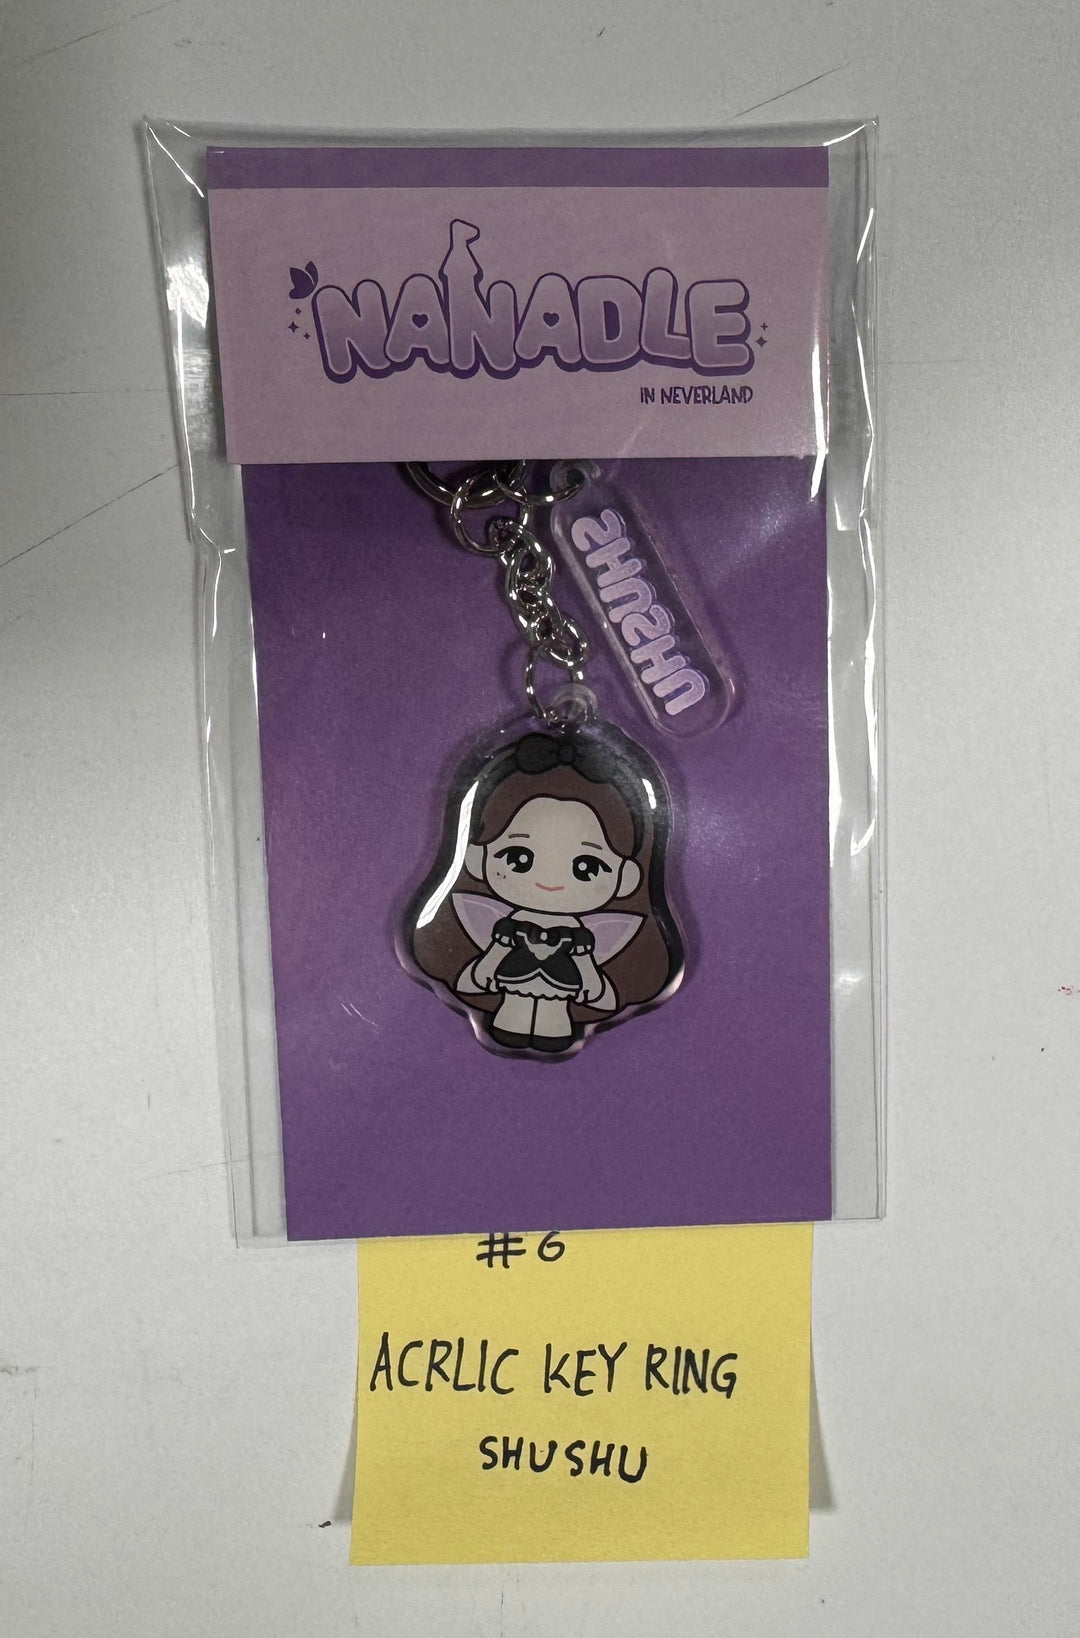 (g) I-DLE "NANADLE IN NEVERLAND" - Soundwave Pop-Up MD [Hand Mirror, Mini Pouch Patch Set, Acrylic Keyring, Photocard Acrylic Stand] [24.5.2] (Restocked 6/4)